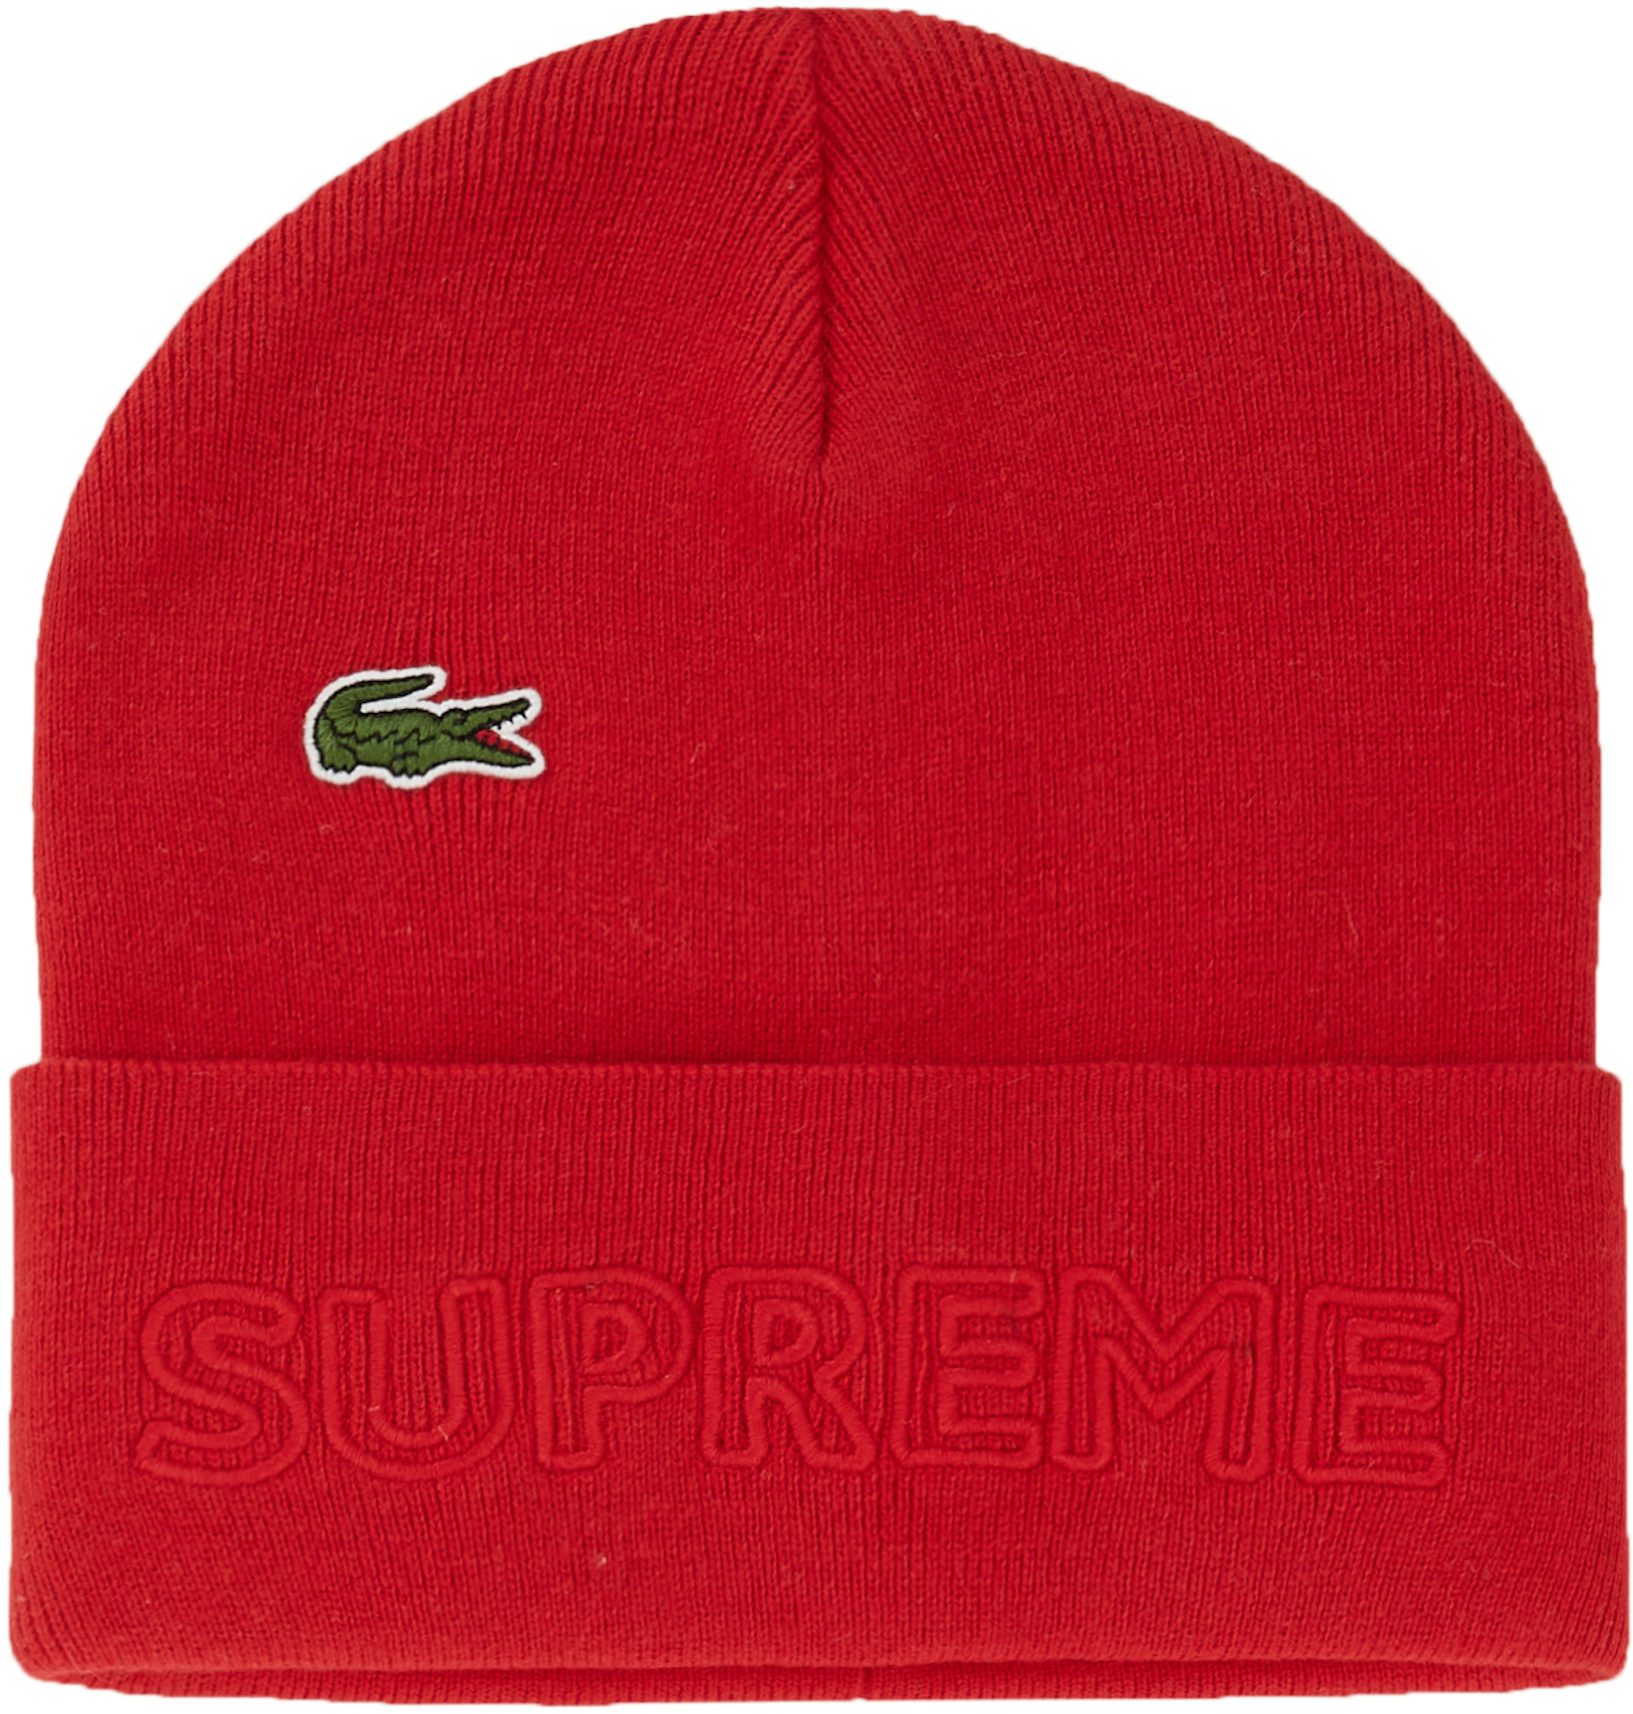 Supreme LACOSTE Beanie Red US - FW19 